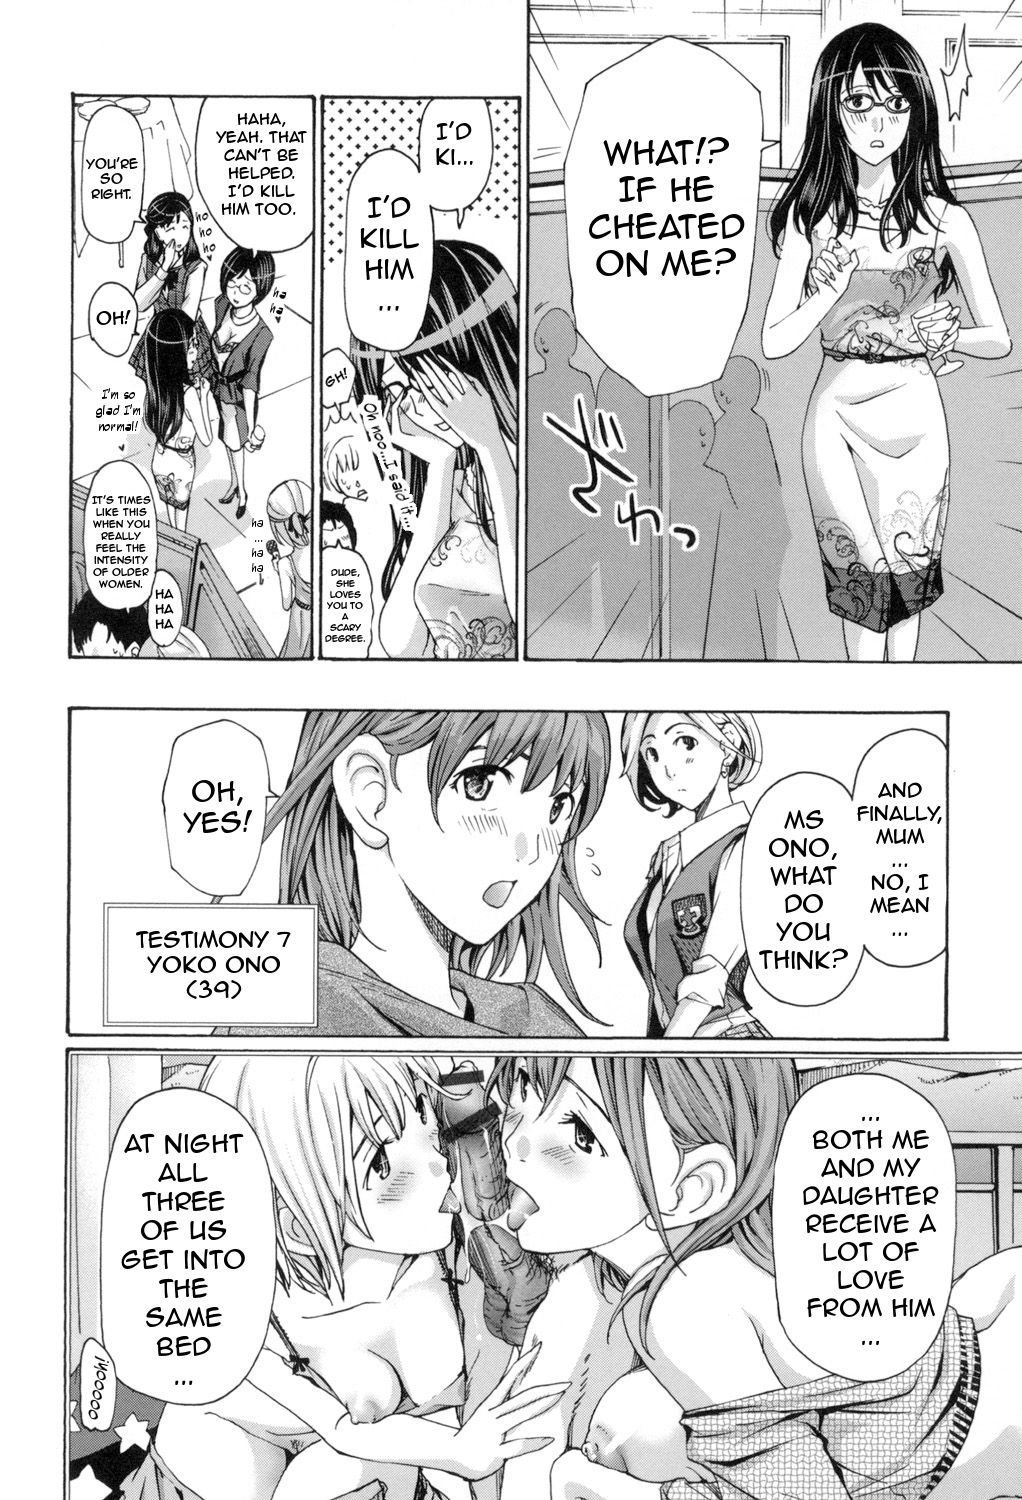 [Asagi Ryu] Onee-san to Aishiacchaou! - Let's Love with Your Sister | Making Love with an Older Woman [English] [Junryuu] 190